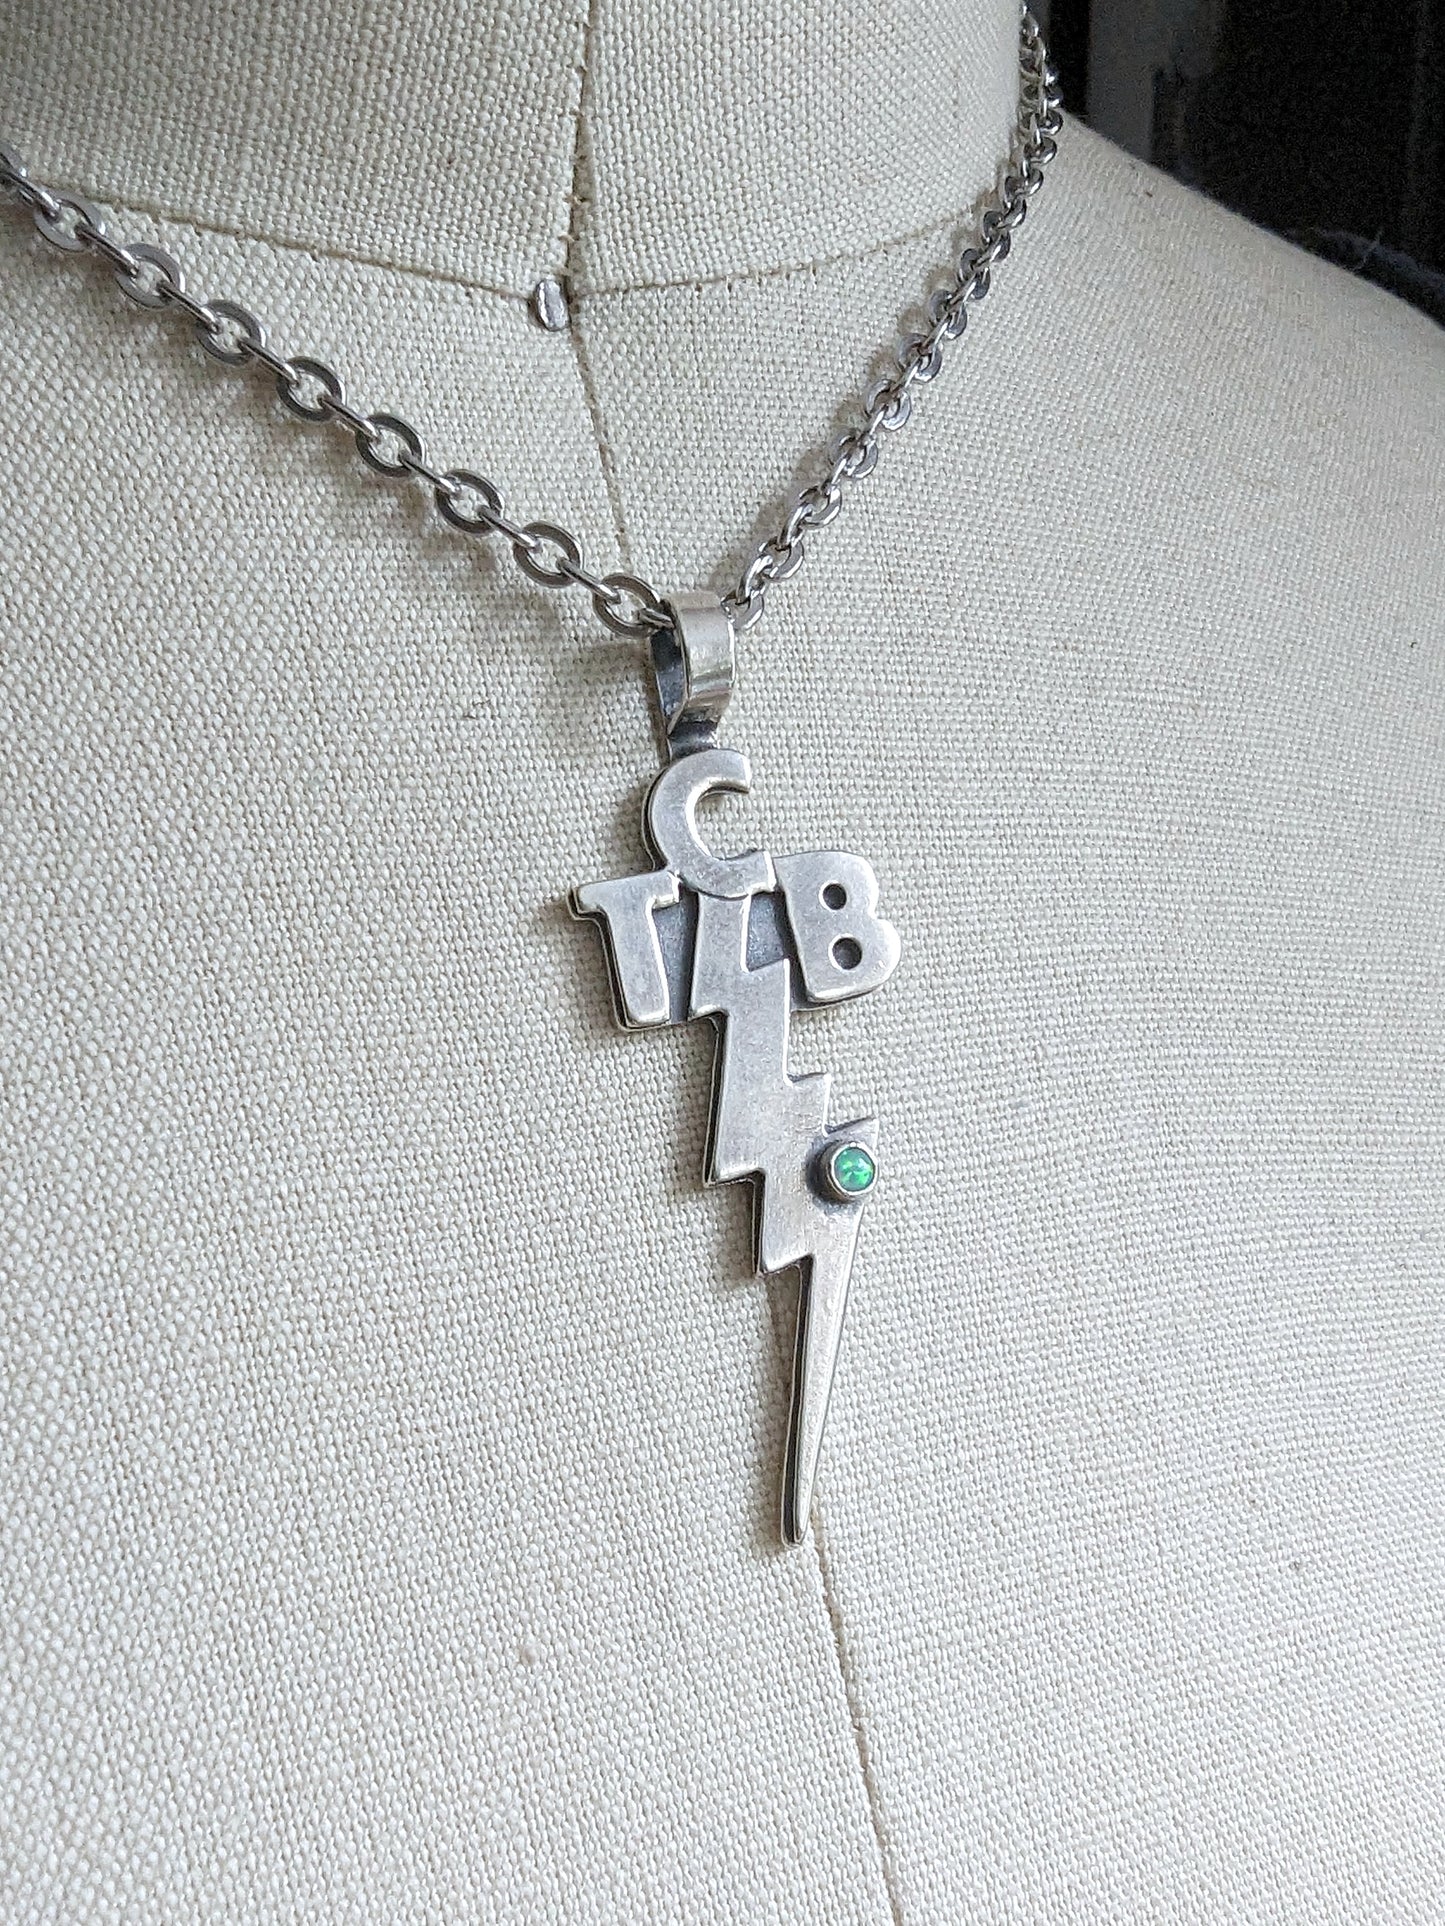 TCB necklace in sterling silver on bust